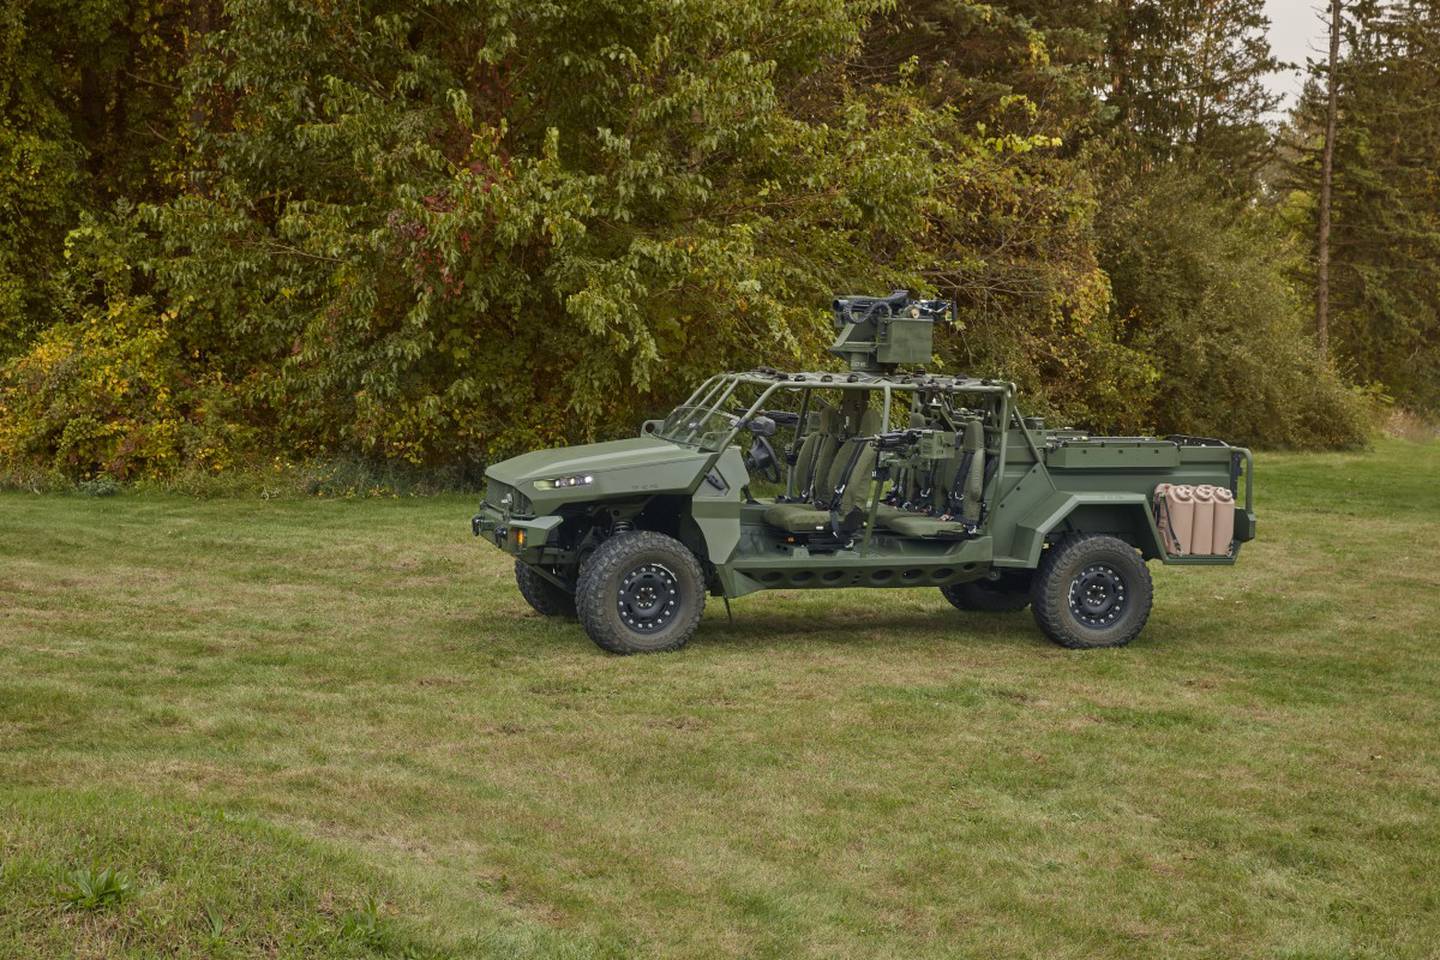 Here’s what industry is offering to meet Army’s electric vehicle needs